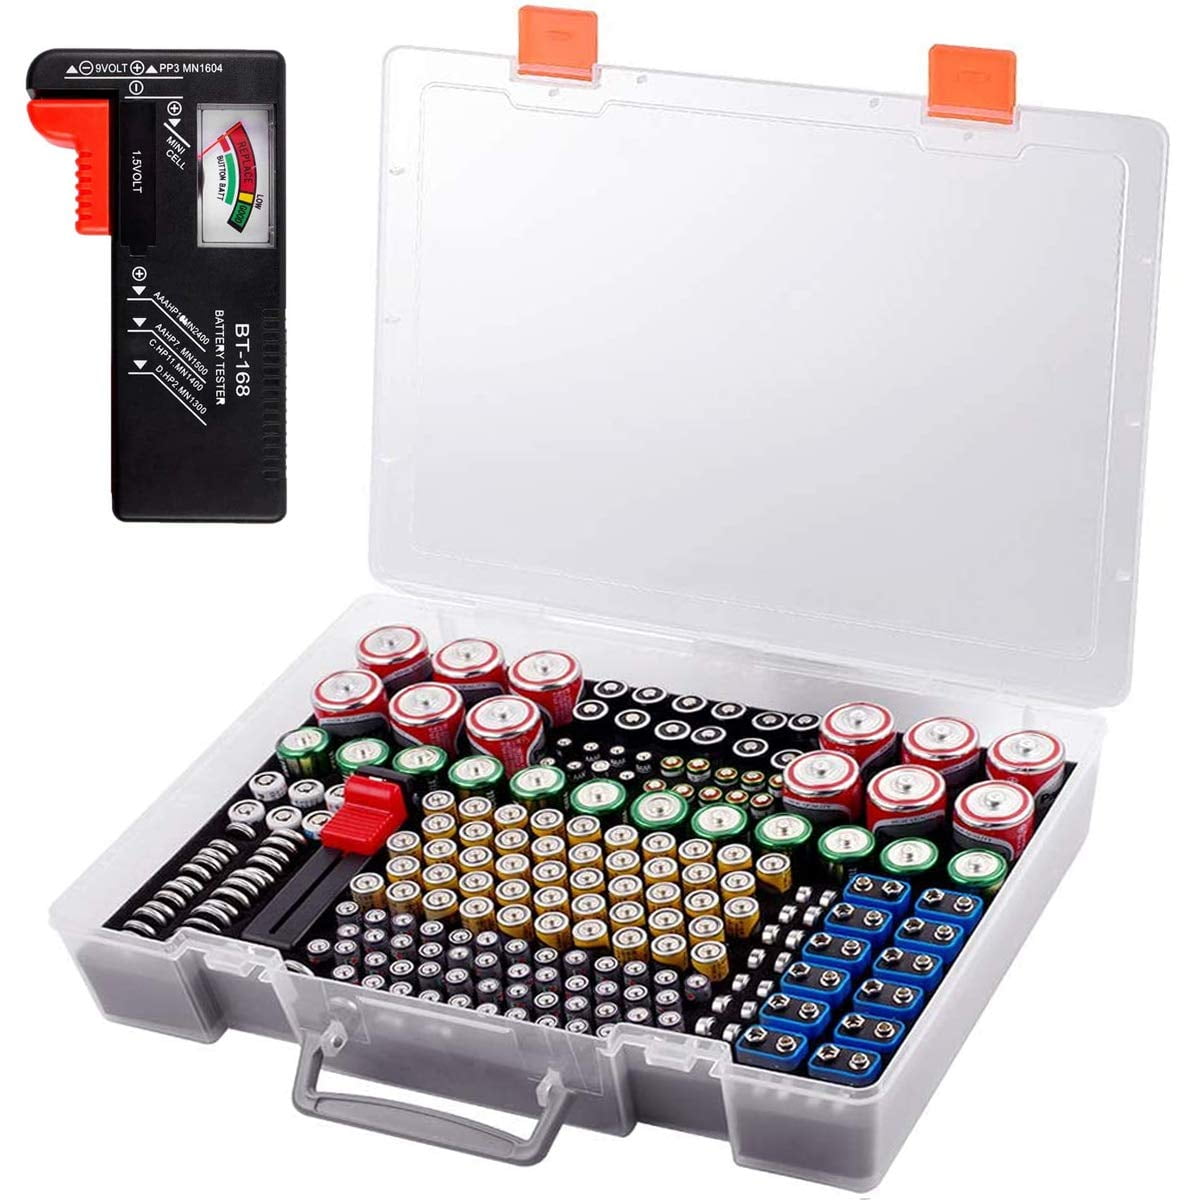 The Battery Organizer Storage Case Hinged Clear Cover Includes Battery Tester in Black